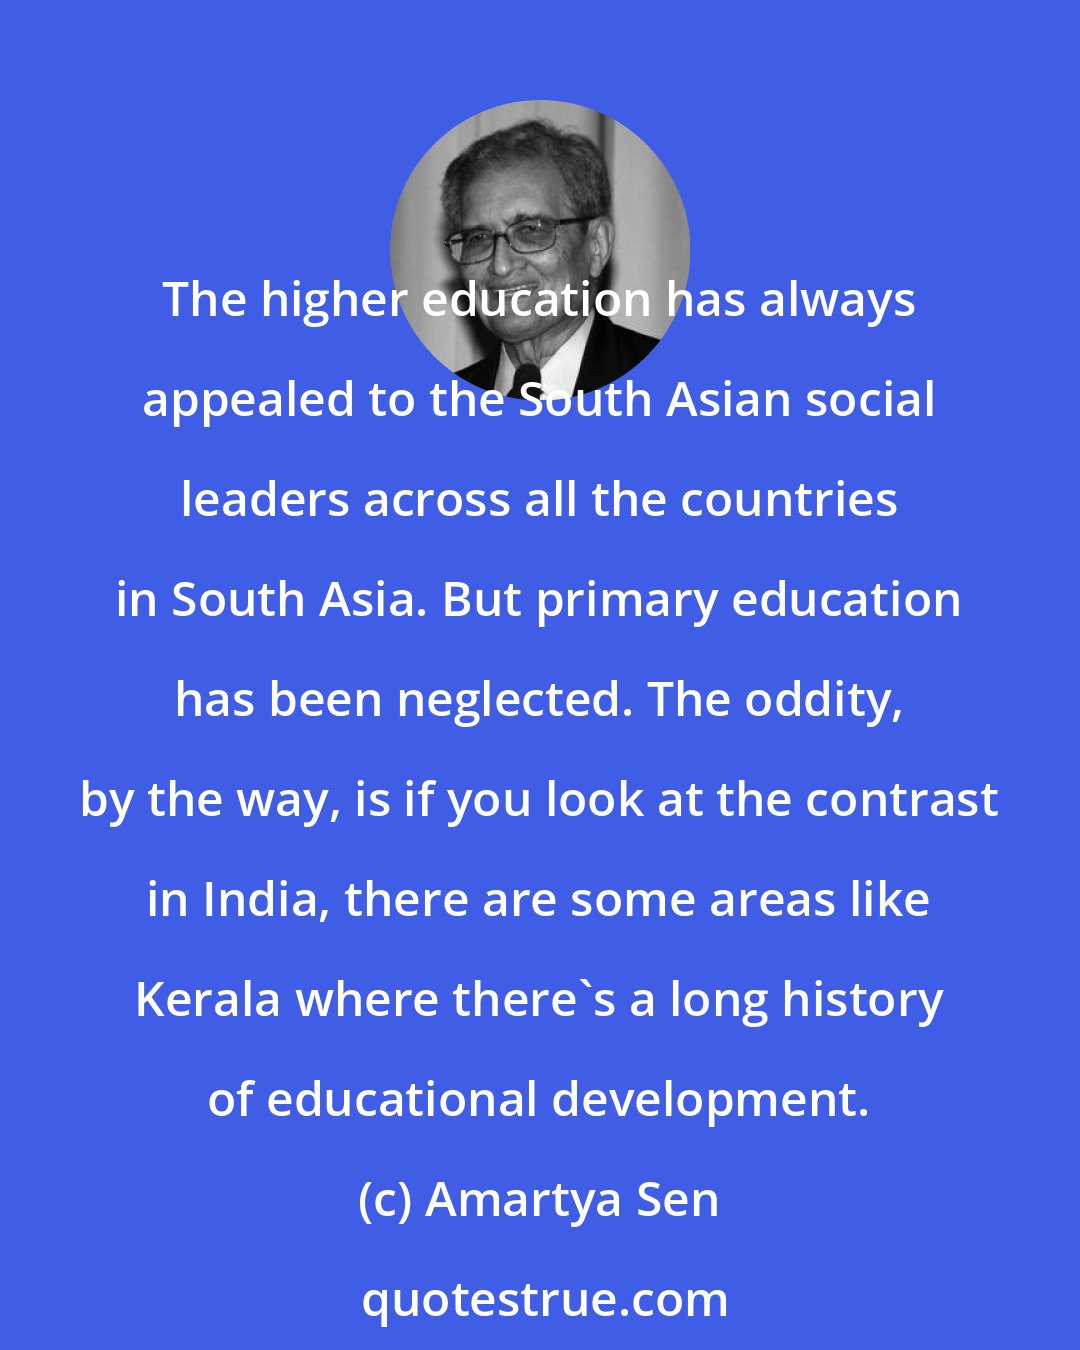 Amartya Sen: The higher education has always appealed to the South Asian social leaders across all the countries in South Asia. But primary education has been neglected. The oddity, by the way, is if you look at the contrast in India, there are some areas like Kerala where there's a long history of educational development.